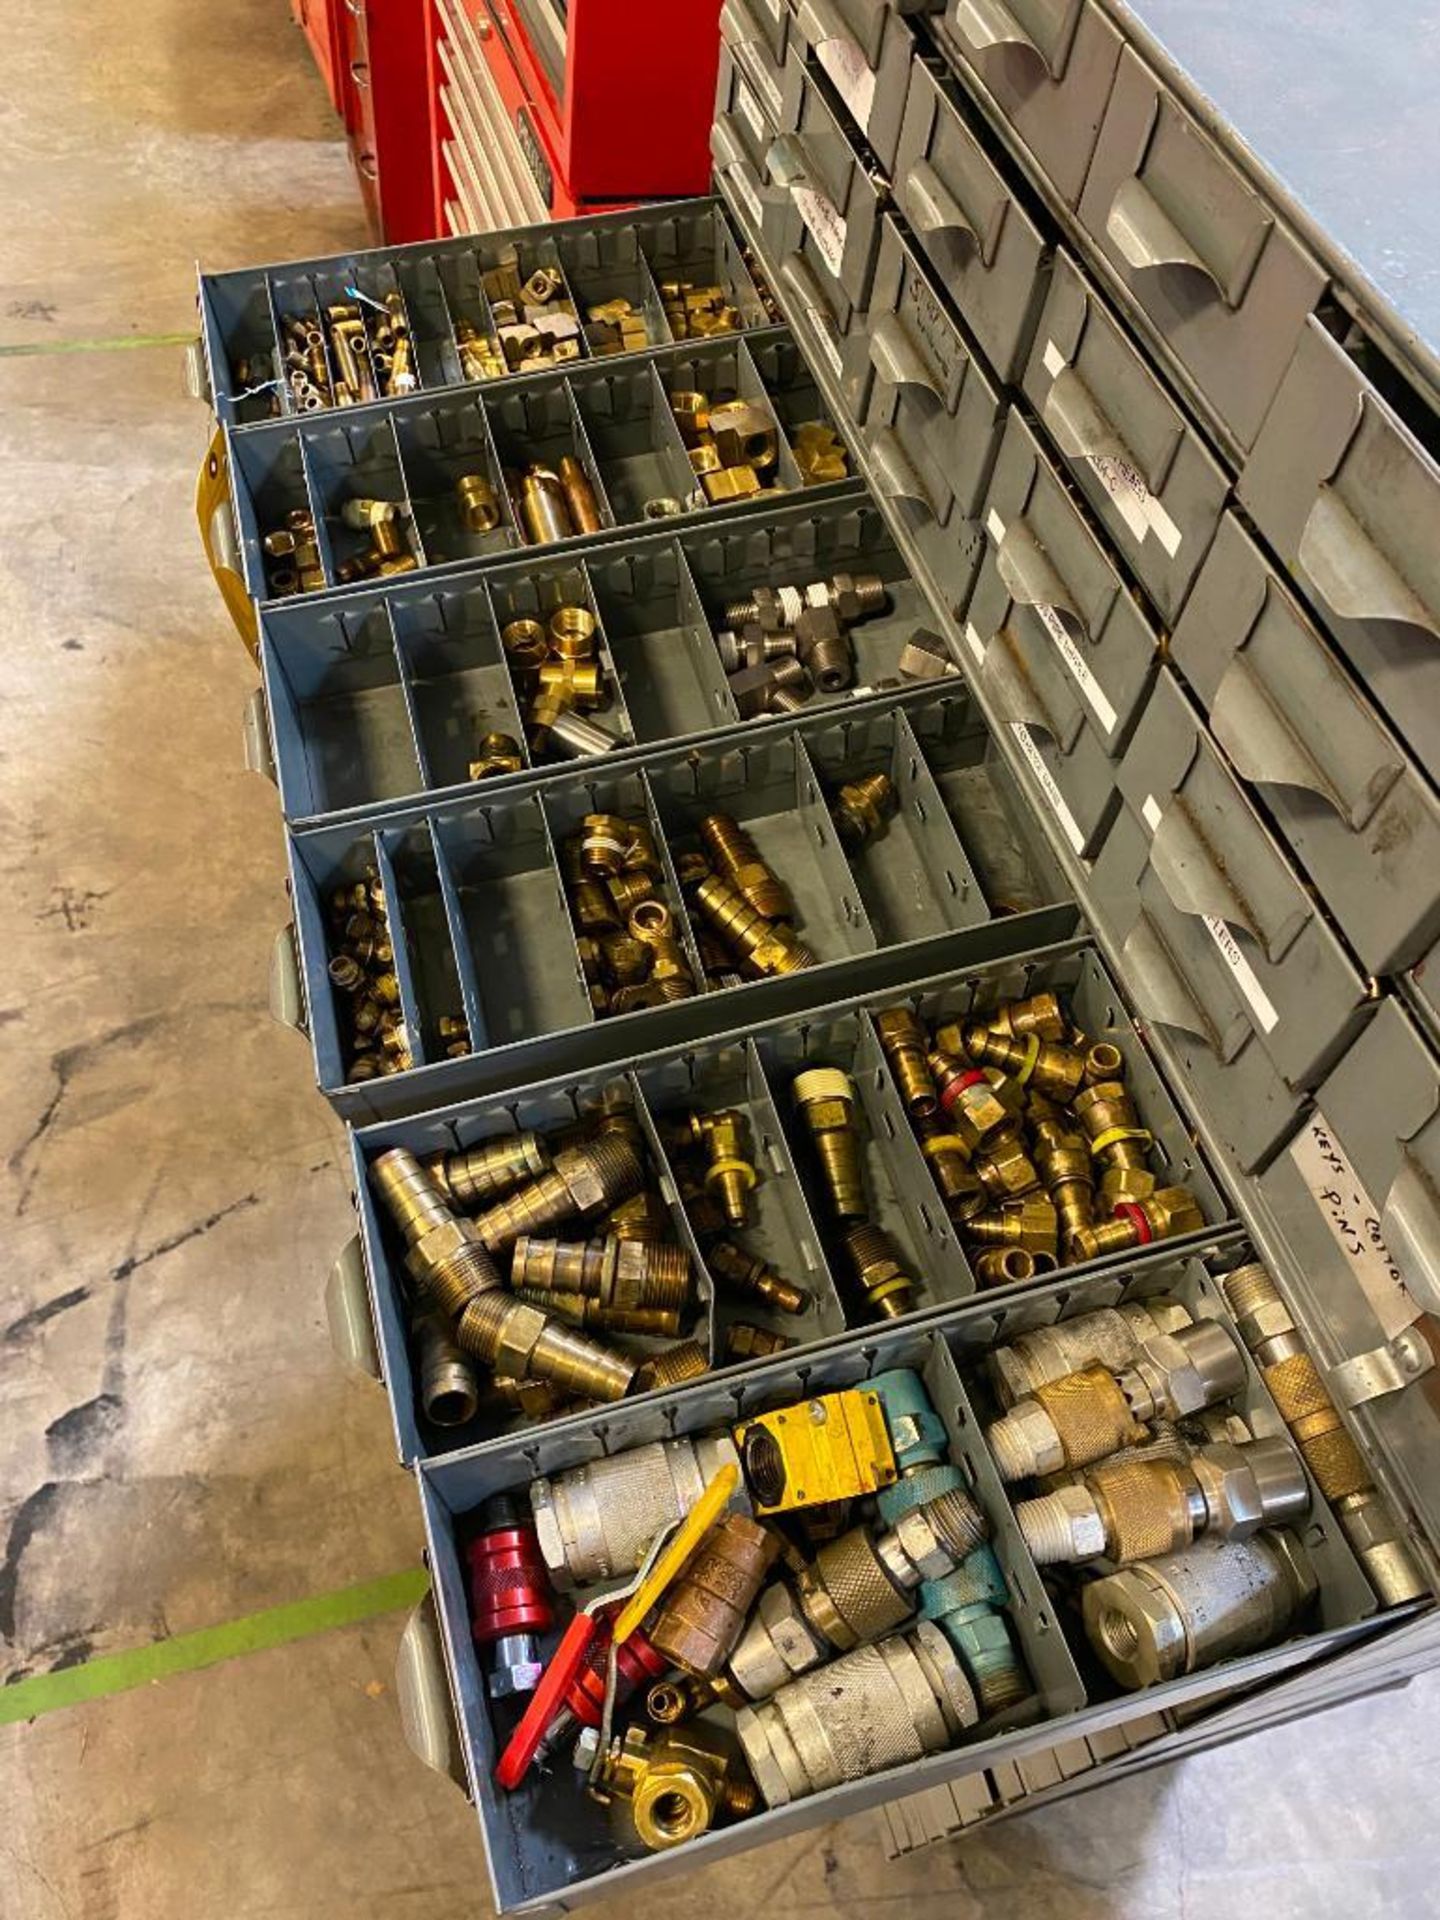 MULTI-DRAWER CABINET W/ BRASS FITTINGS, AIR SHUT OFF VALVES, FASTENERS, FUSES, KEY STOCK - Image 3 of 6